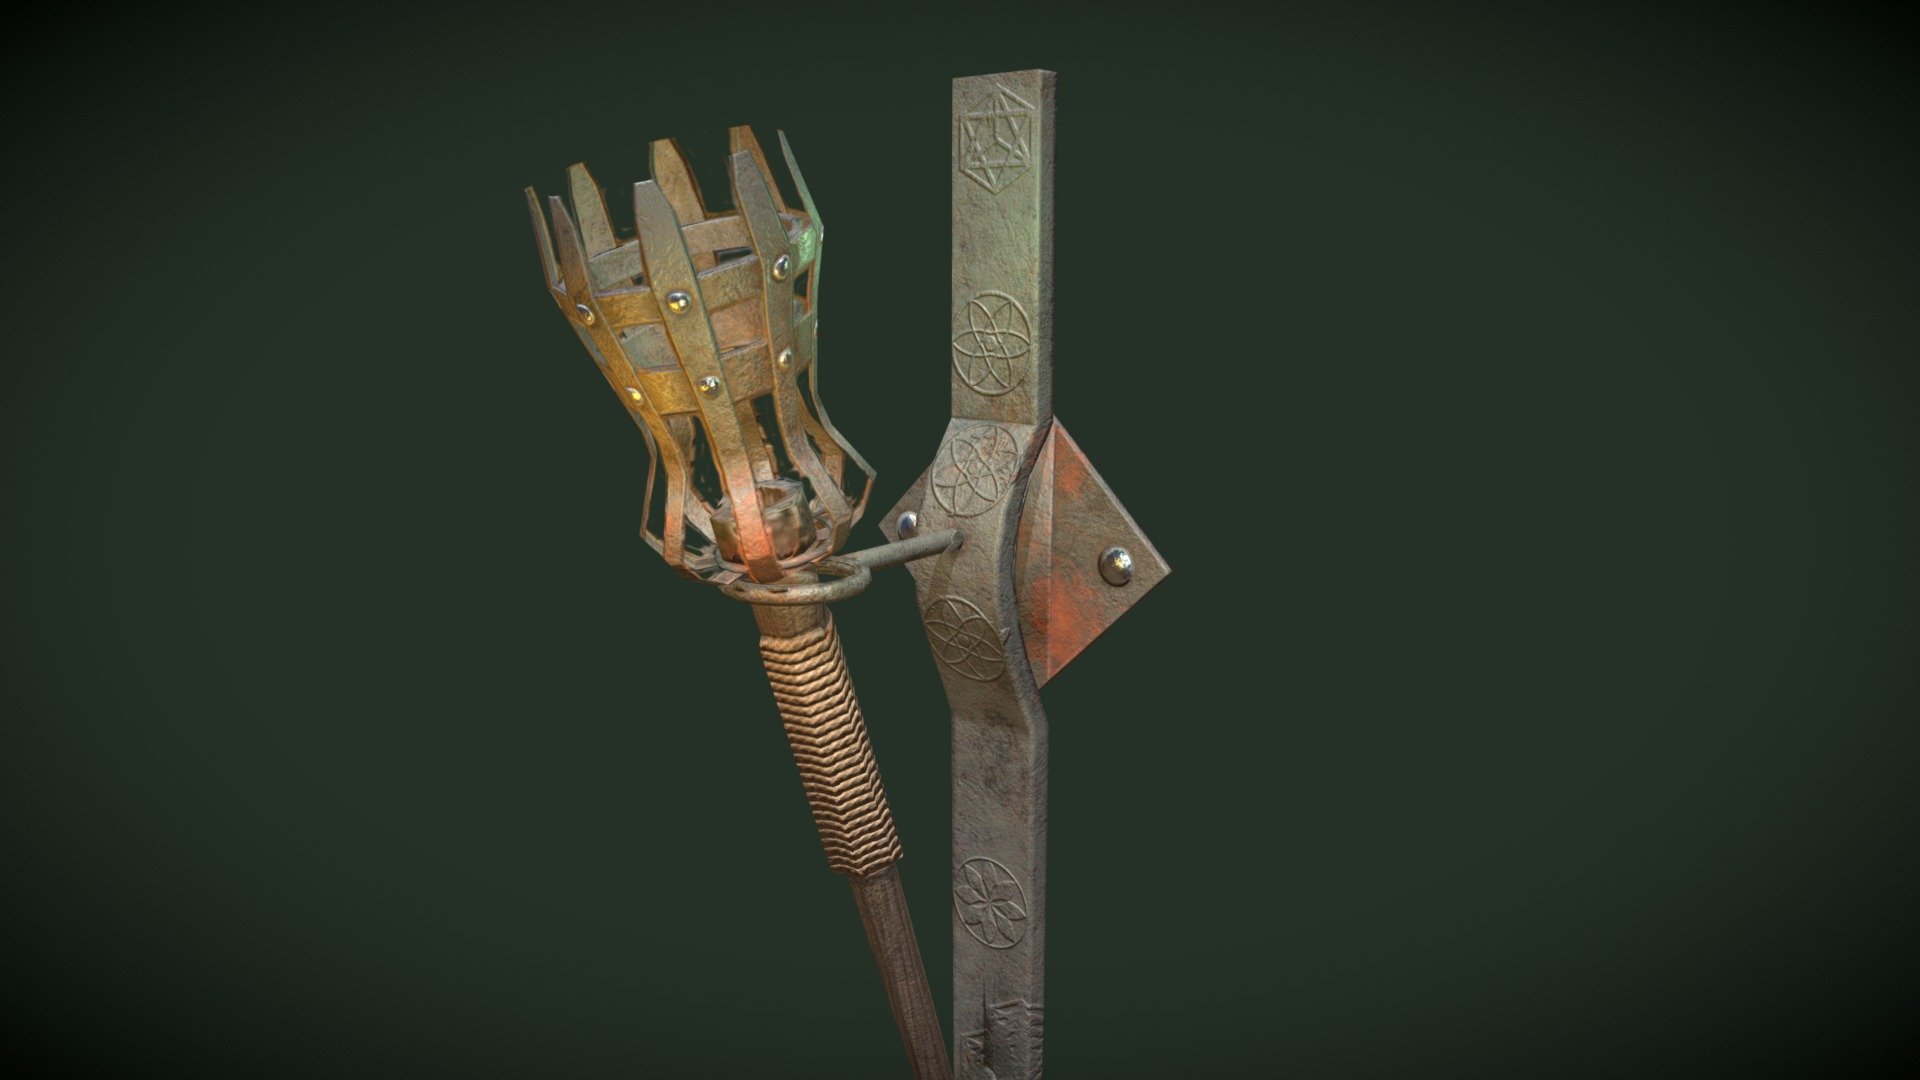 This is a torch for one of the environments that I am doing for one of my classes 3d model